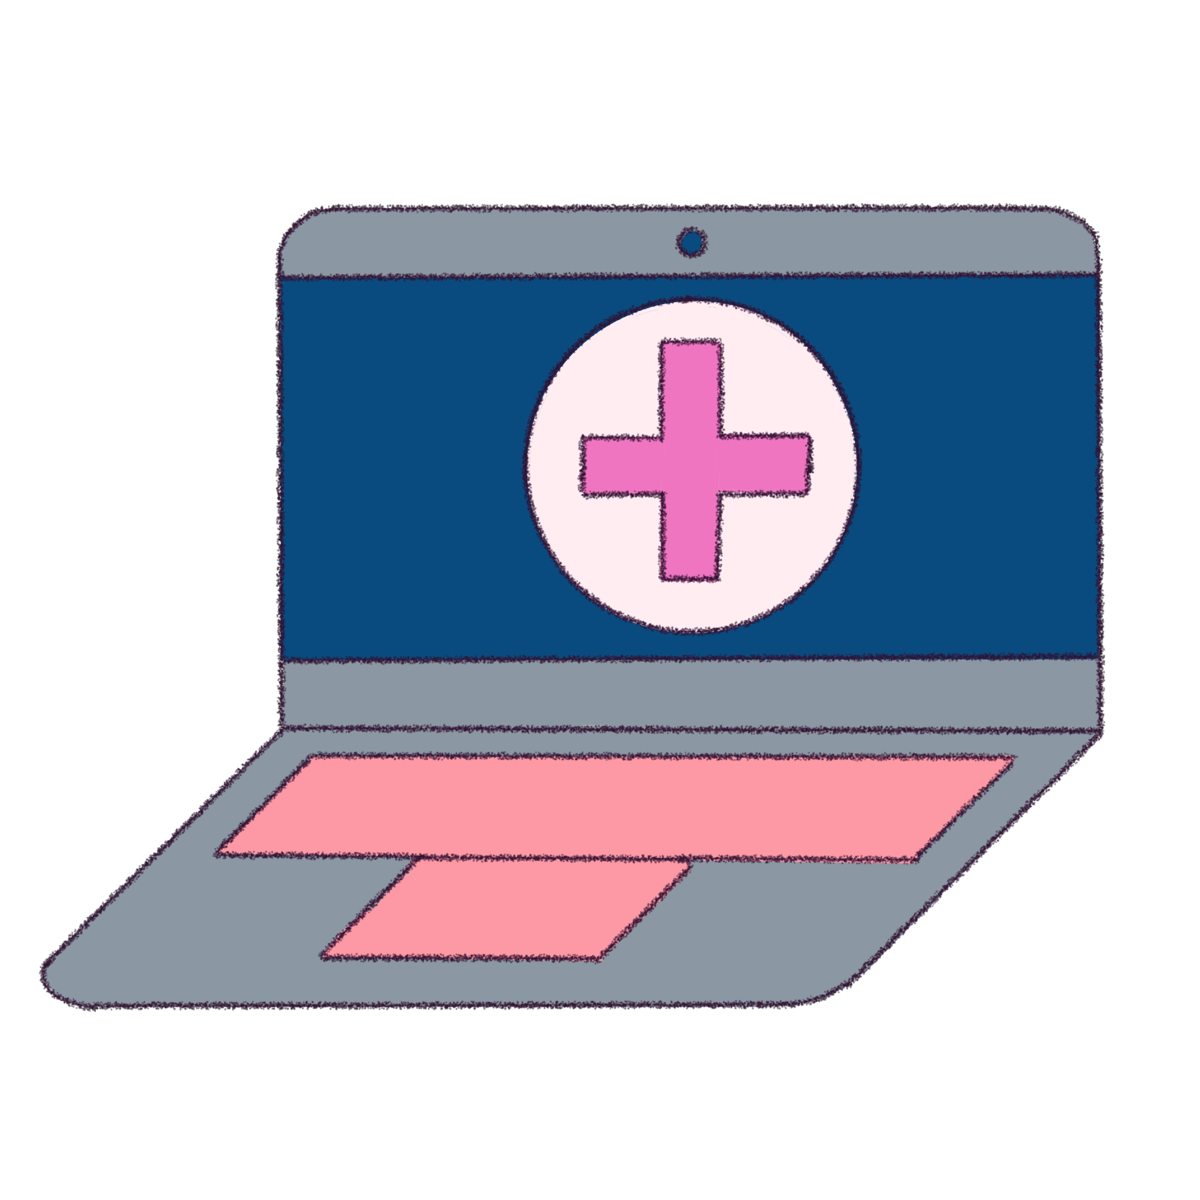 A laptop with a telehealth logo on the screen